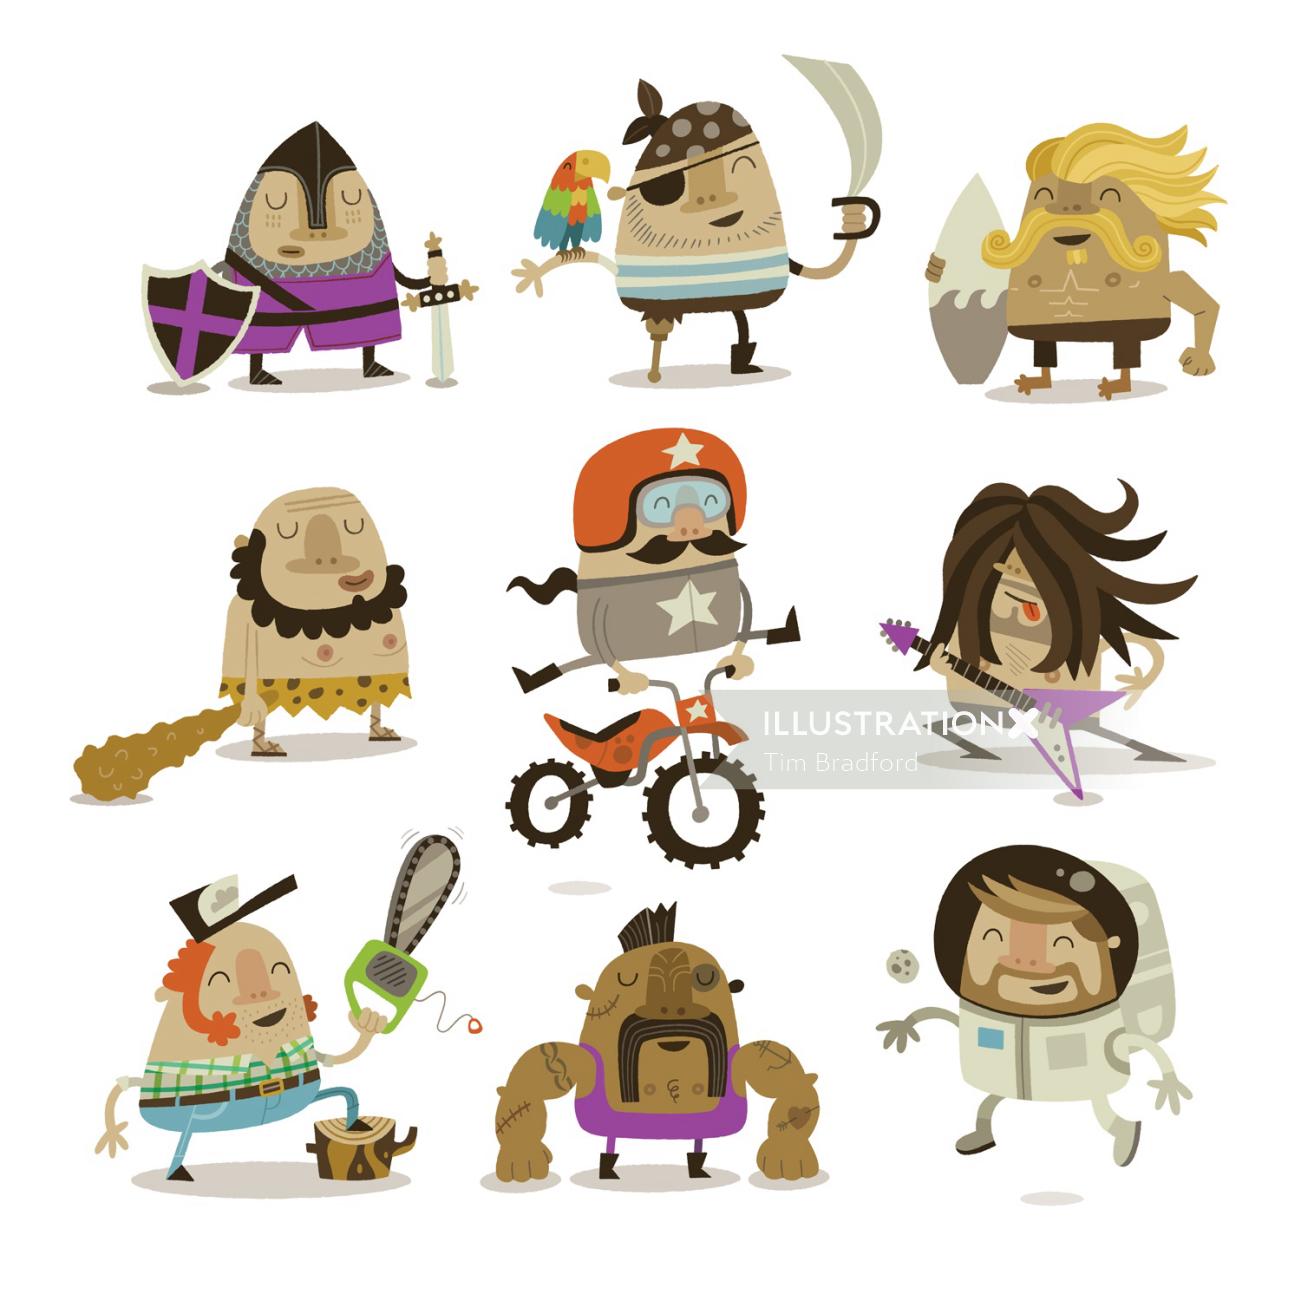 People character icons
